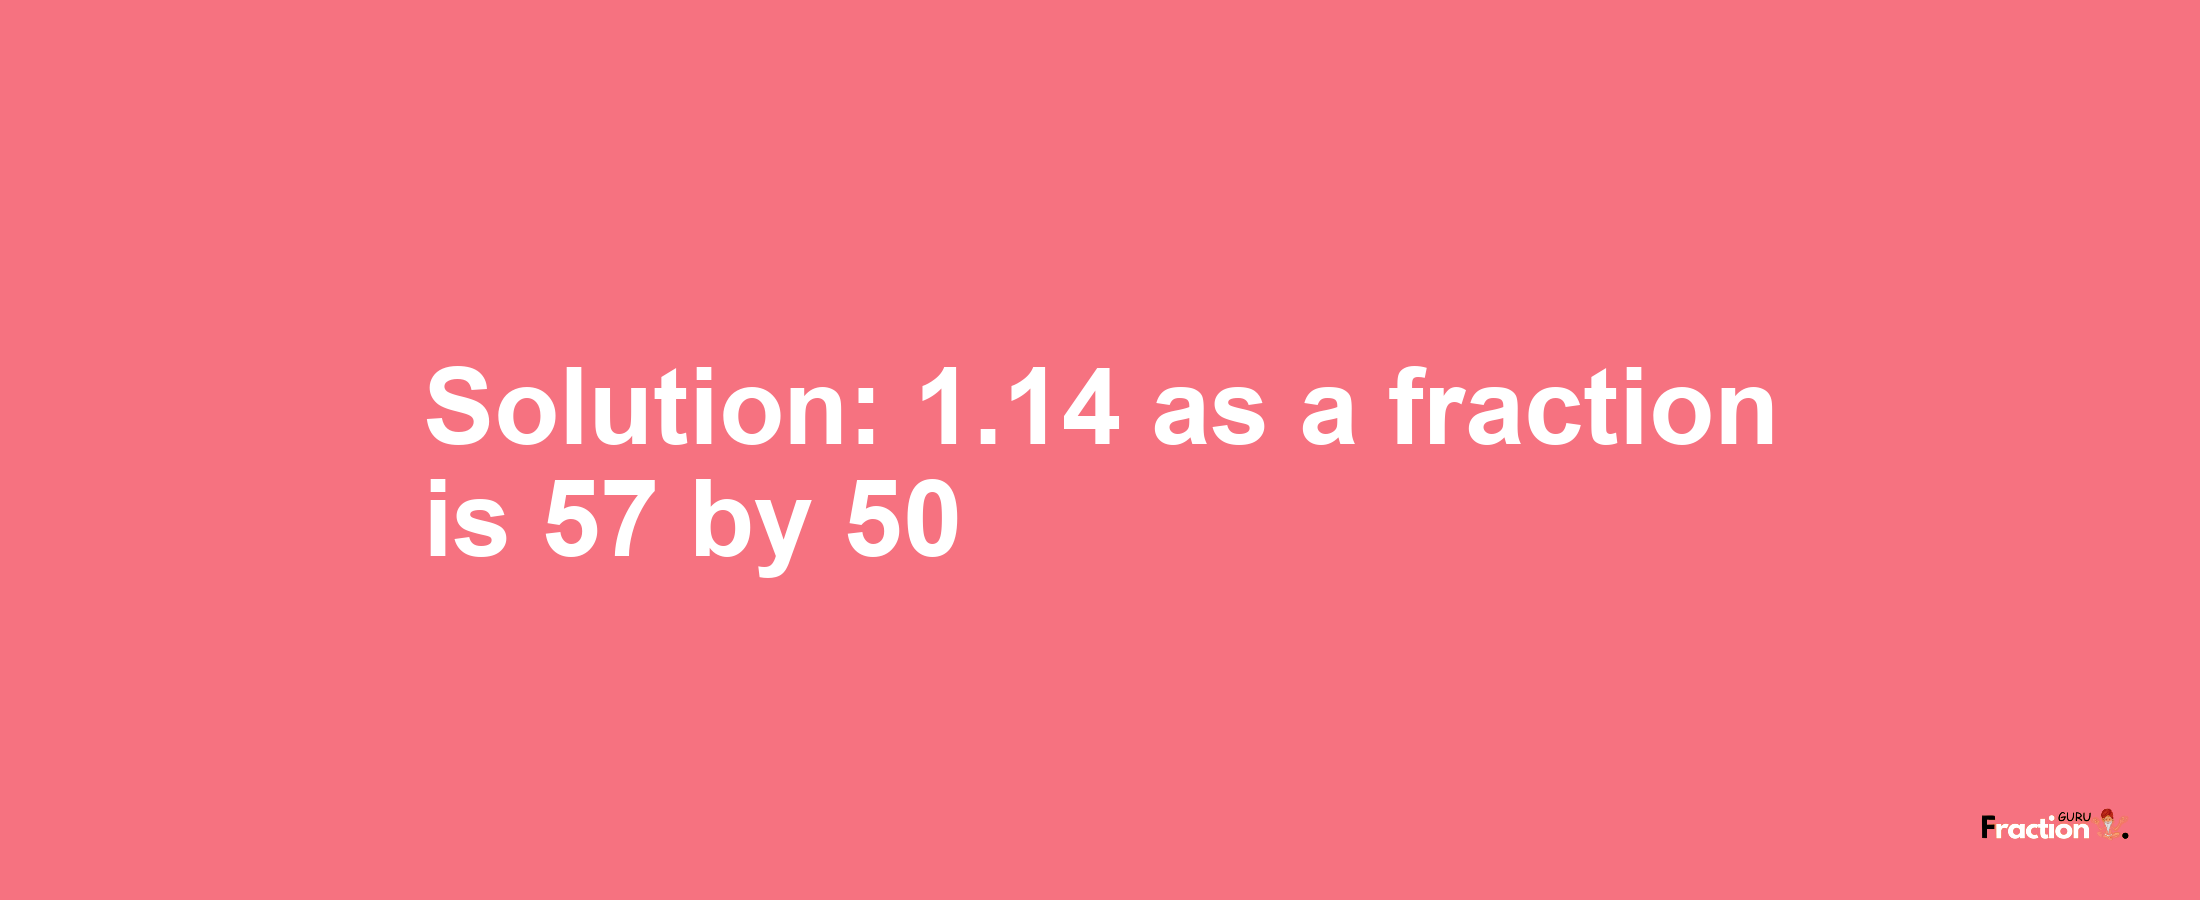 Solution:1.14 as a fraction is 57/50